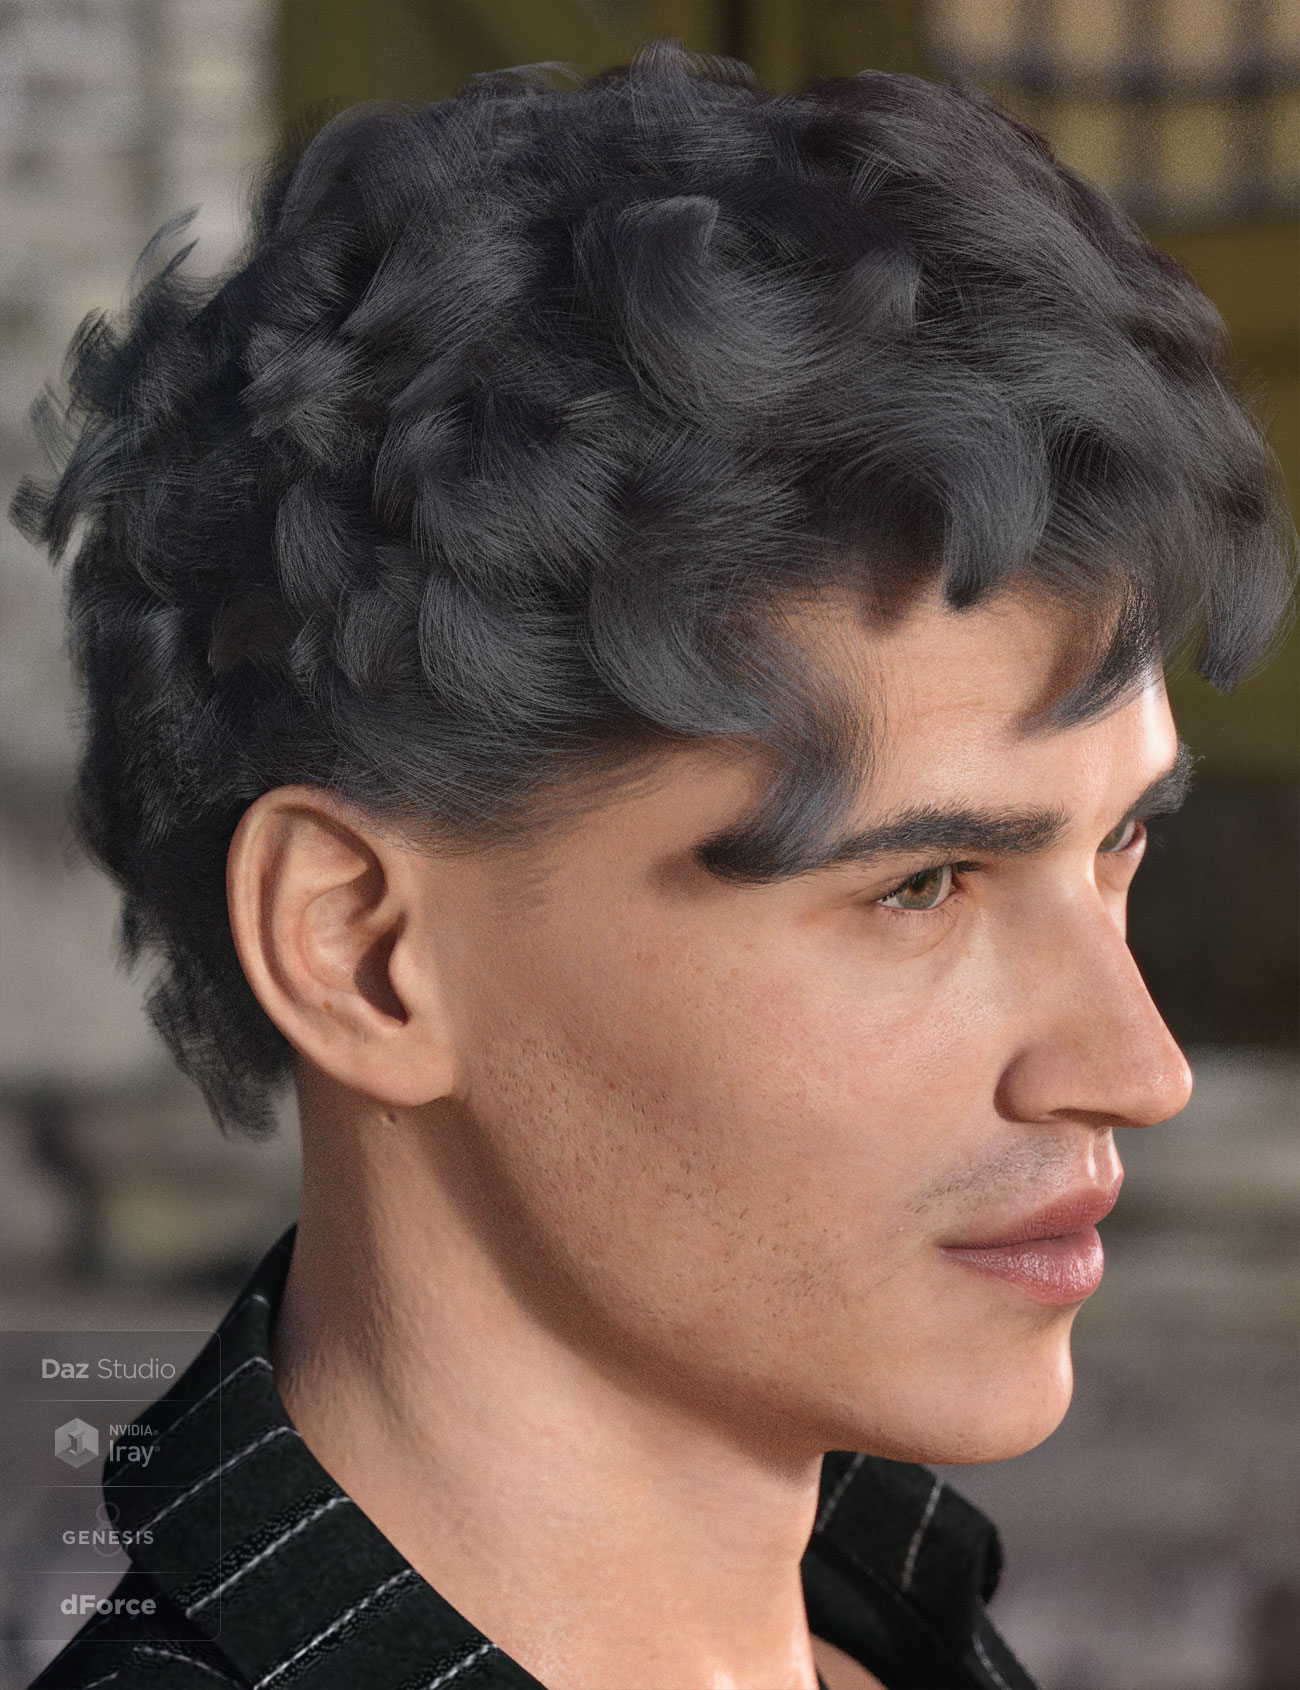 dforce emile hair for genesis 3 and 8 males 00 main daz3d FZNcDqR0